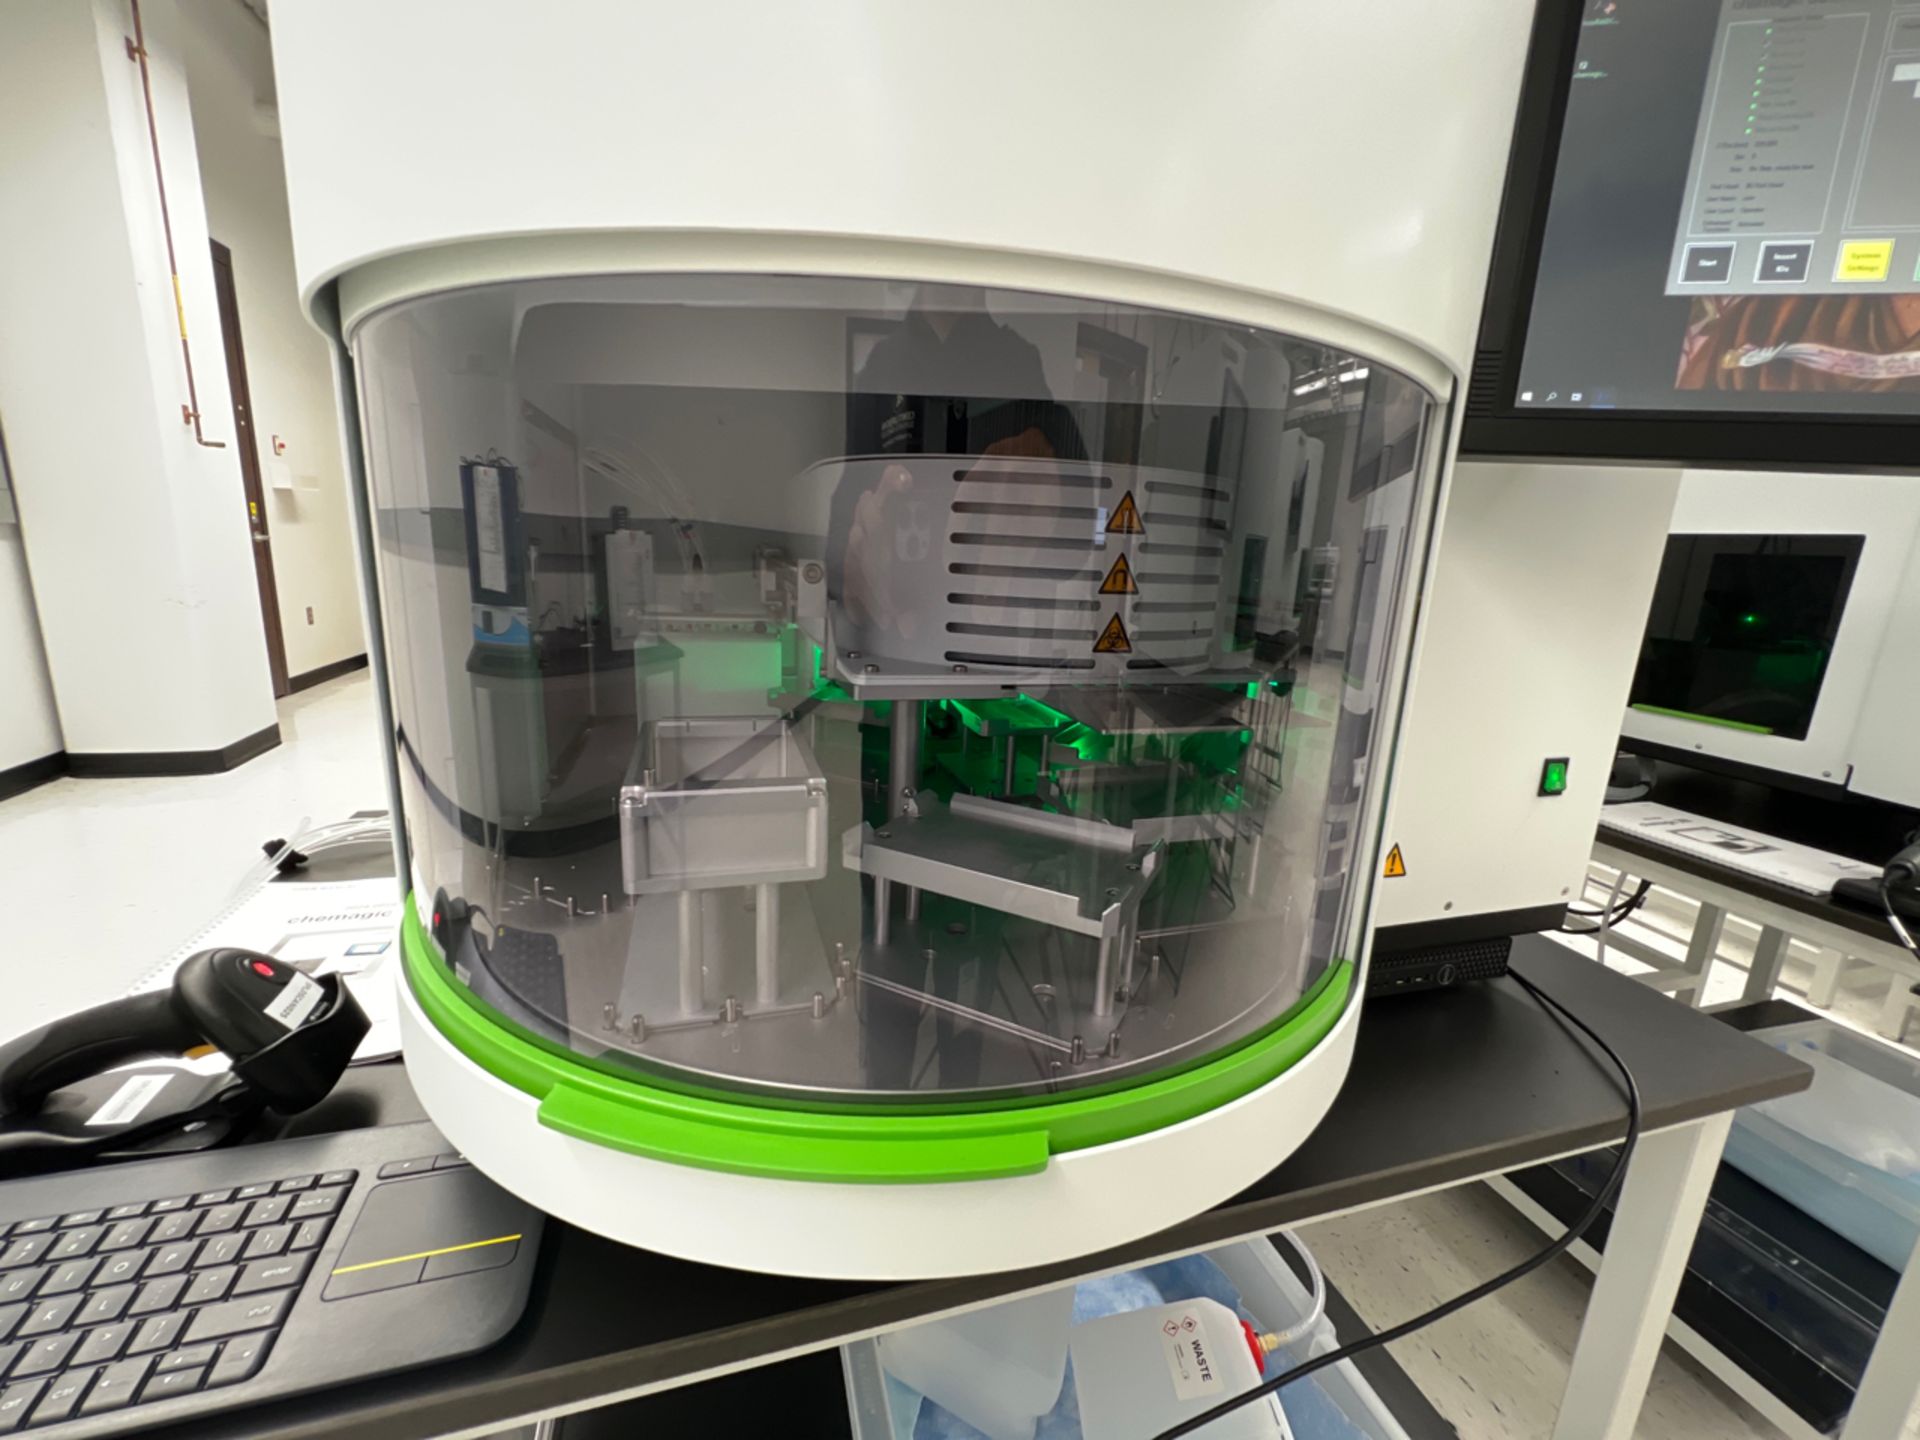 PERKINELMER CHEMAGIC 360 NUCLEIC ACID EXTRACTOR AUG-2020 SOFTWARE 6.3.0.3 2024-0020 20240935 TABLE - Image 5 of 18